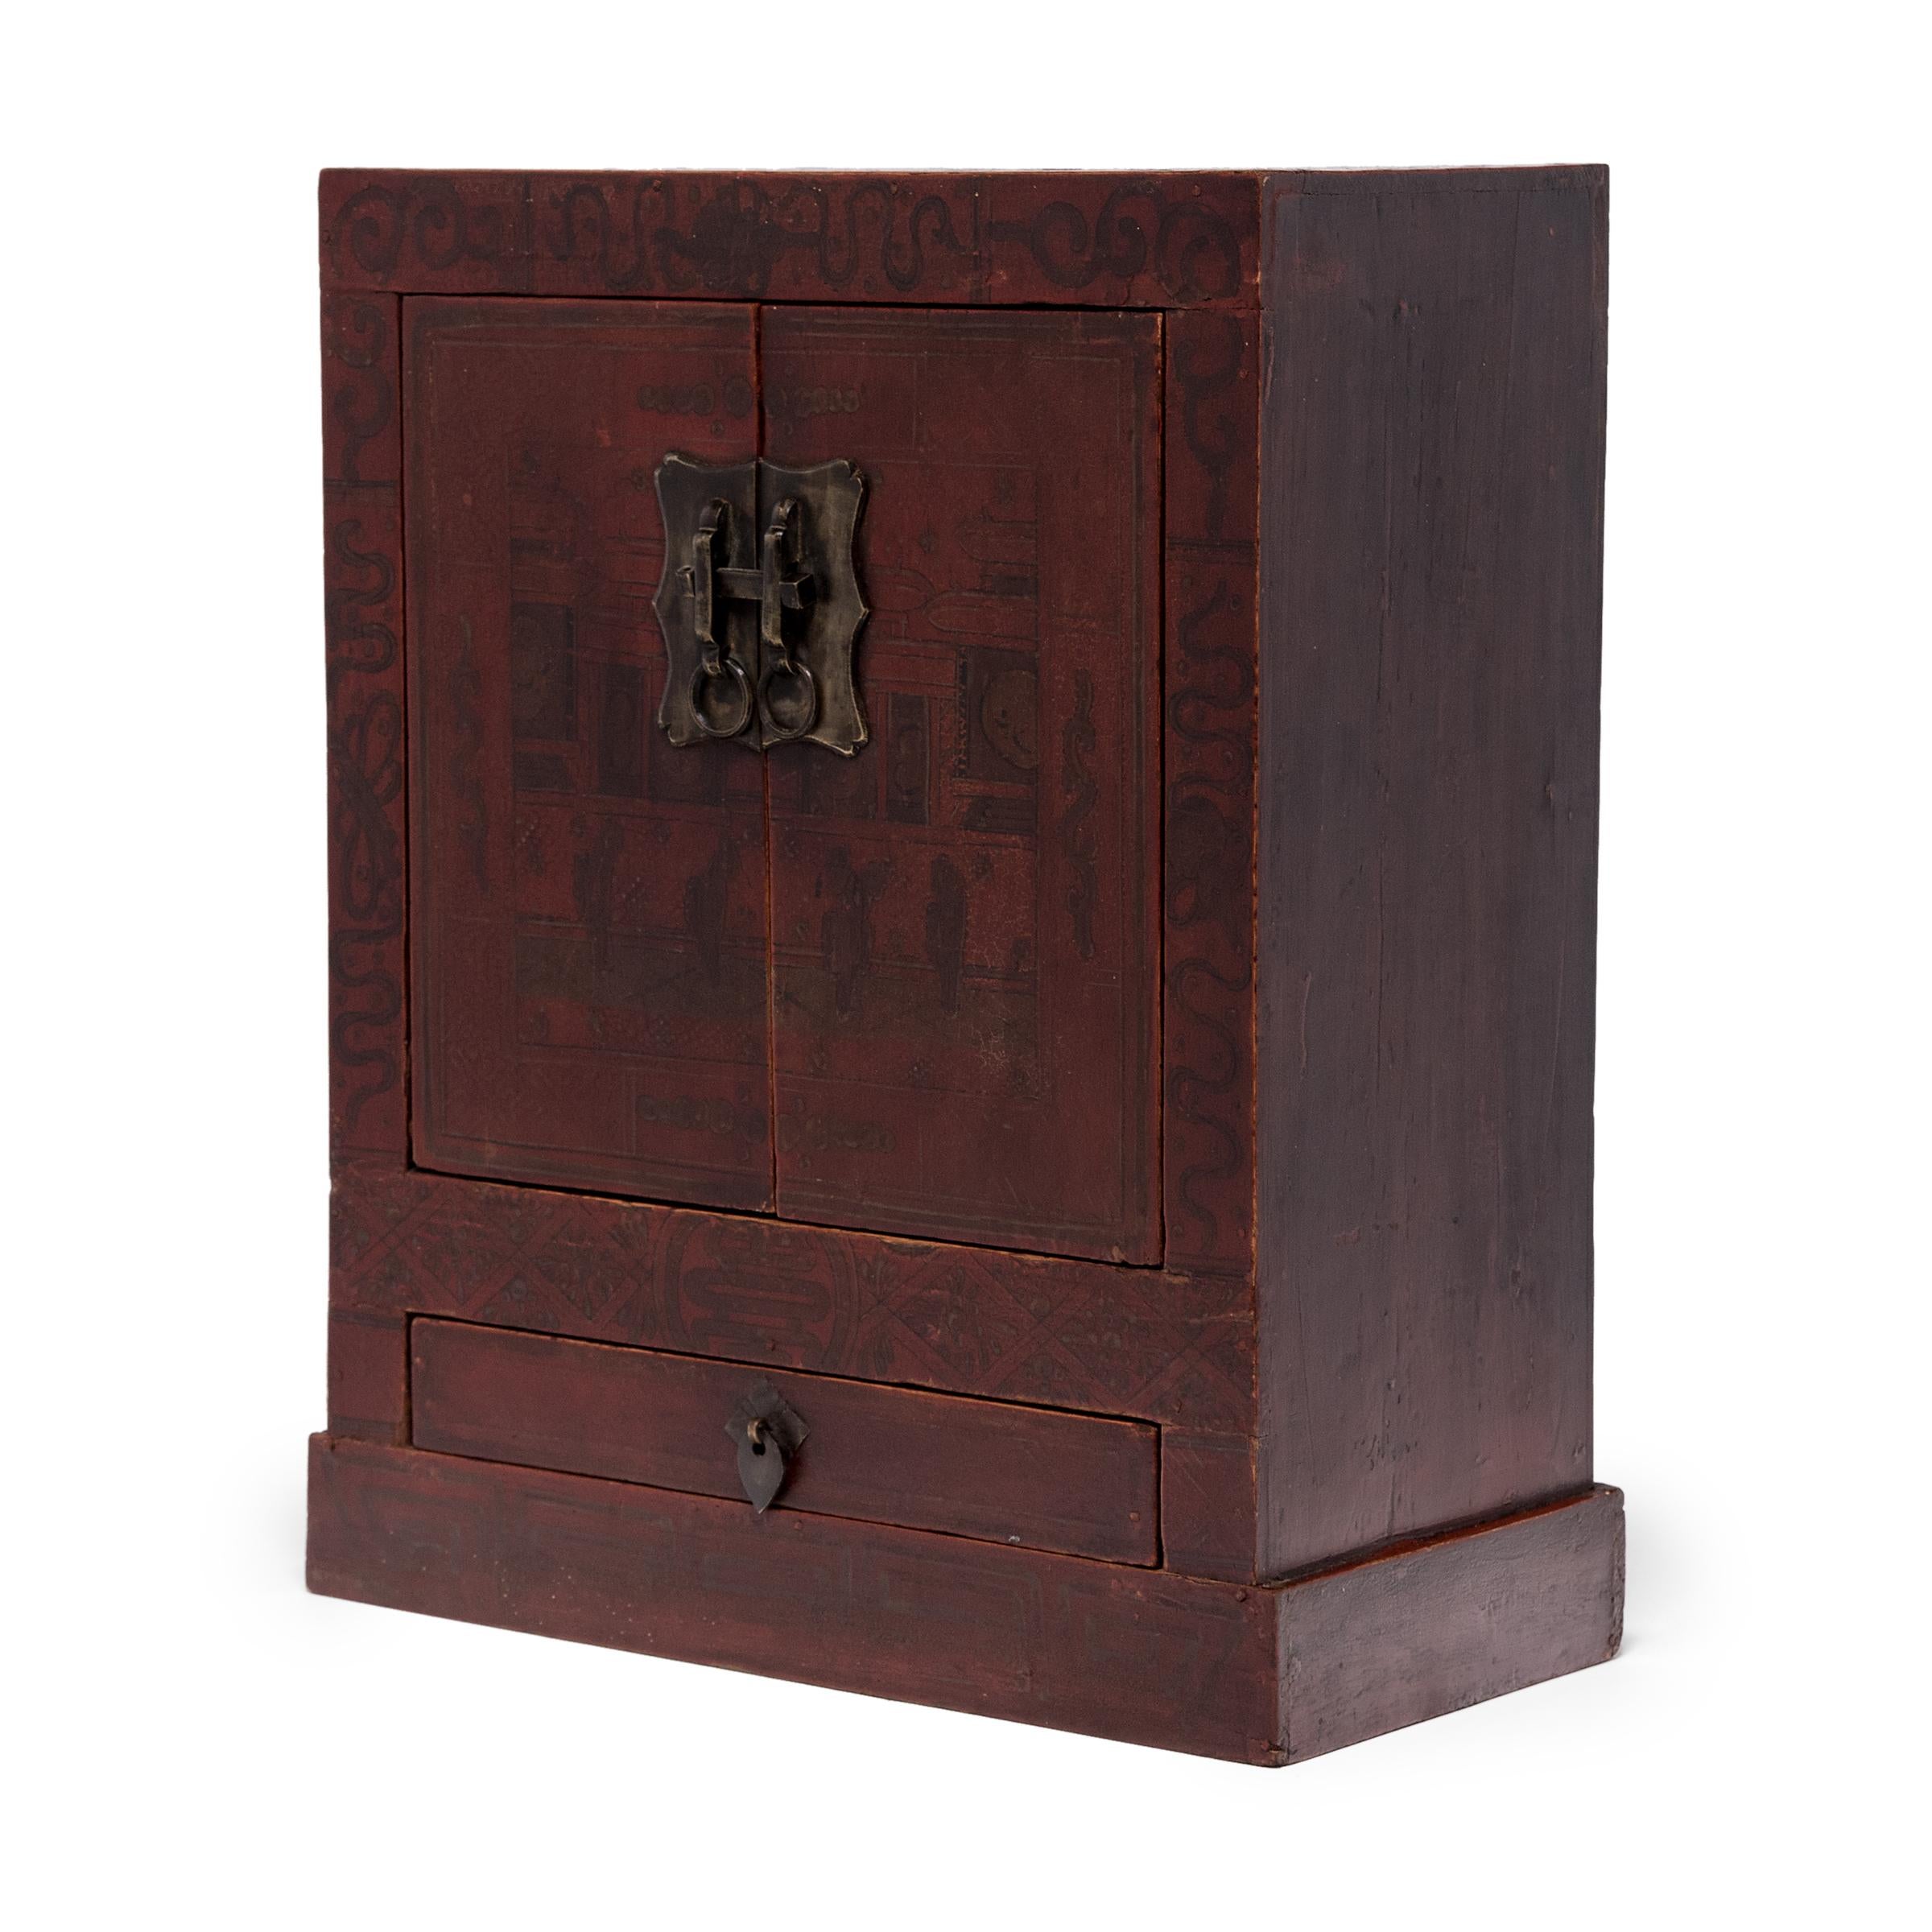 The basic set up for traditional ancestor worship was an altar upon which offerings, ancestral tablets, and images of ancestors were placed. Often the altar was supplemented with a shrine box such as this small red lacquer cabinet, which may have